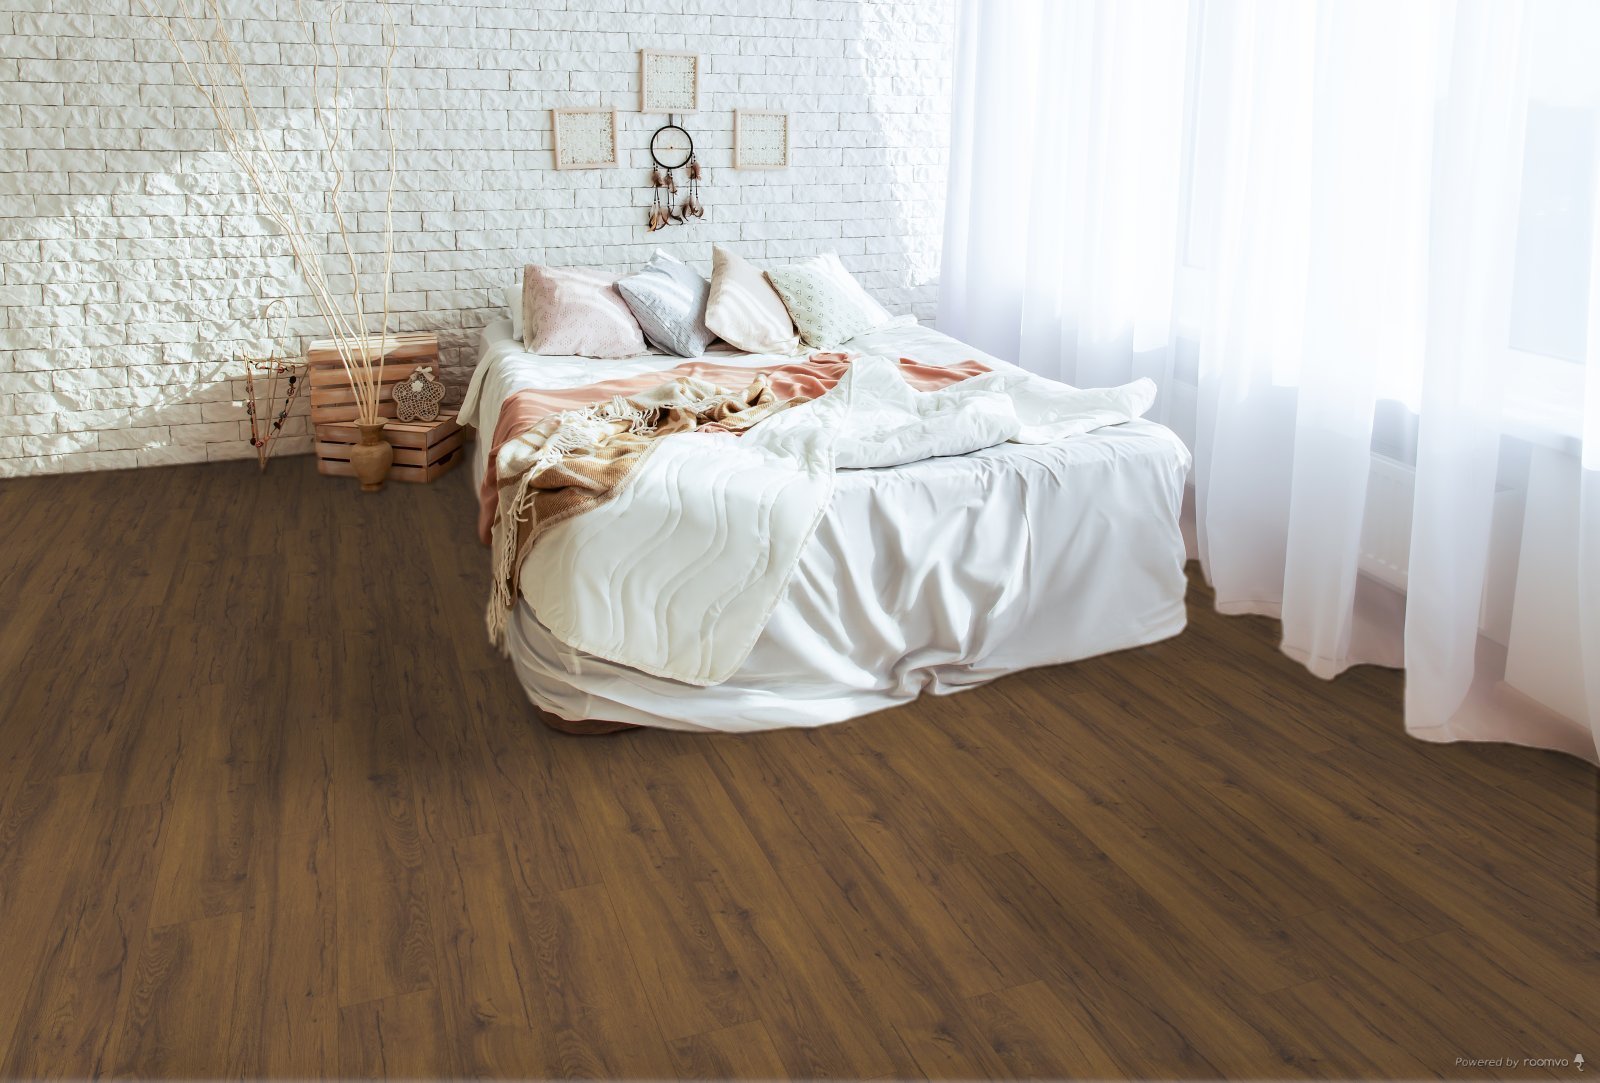 Horizen Flooring presents to you a picture of a quality wide plank Sienna luxury vinyl plank. NovoCore Premium collection features a wide range of colors & designs that will compliment any interior. Natural wood grain synchronized surface allow for an authentic hardwood look & feel. This collection features a 0.25″ / 6.5 mm overall thickness and a durable 22 mil / 0.55 mm wear layer for residential and commercial applications.